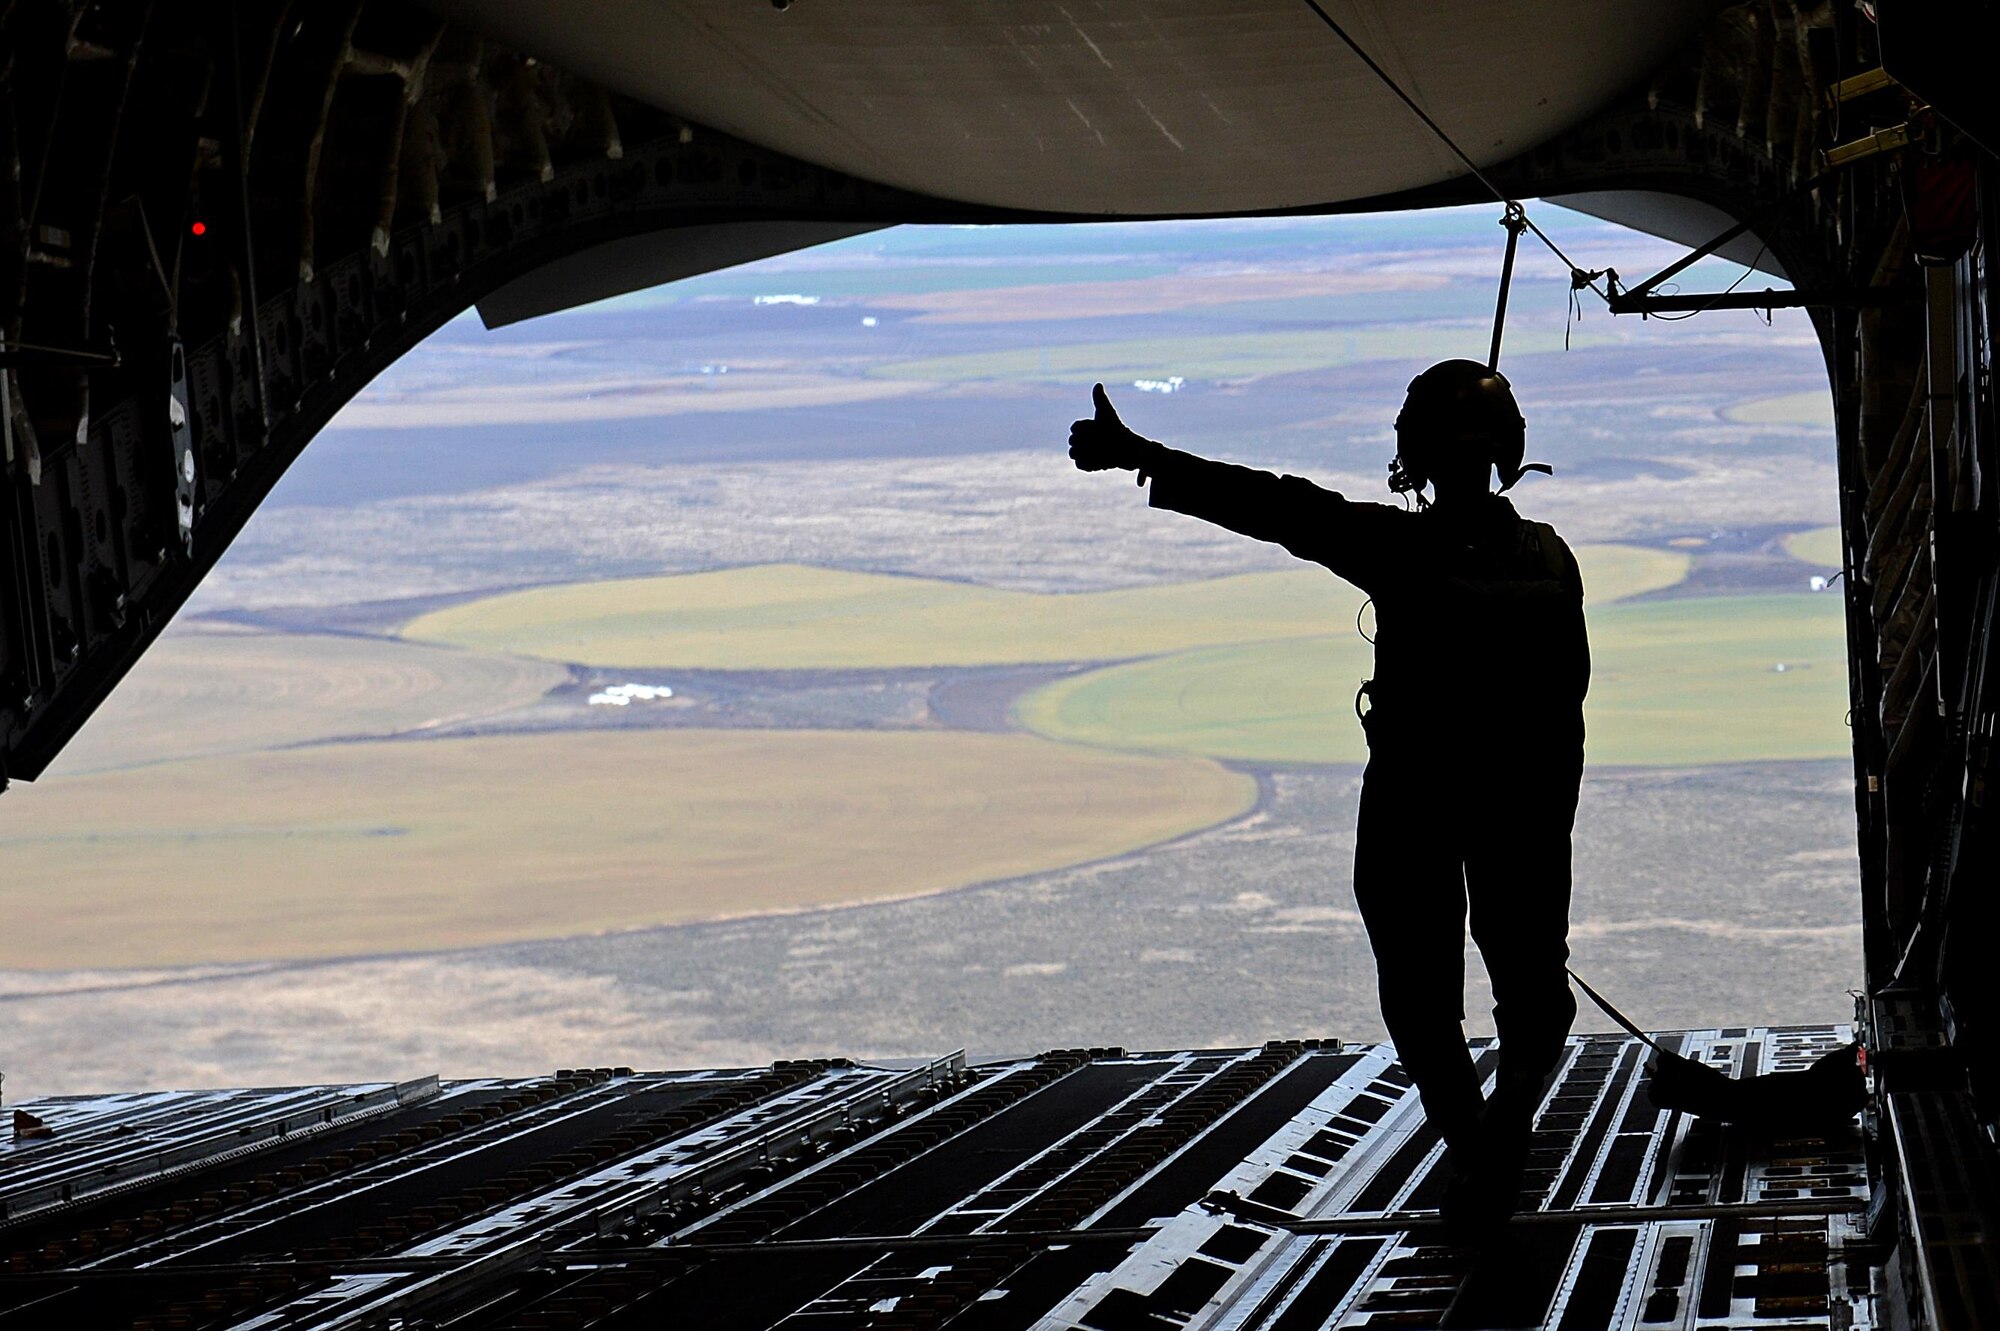 Staff Sgt. Joseph Timpson, a 10th Airlift Squadron loadmaster, gives a thumbs up after an airdrop during exercise Rainier War Dec. 10, 2015, over the Rainier drop zone in Washington. Rainier War included the large formation airdrops and a larger formation of C-17 Globemaster IIIs before heading back to Joint Base Lewis-McChord, Wash. (U.S. Air Force photo/Senior Airman Divine Cox)